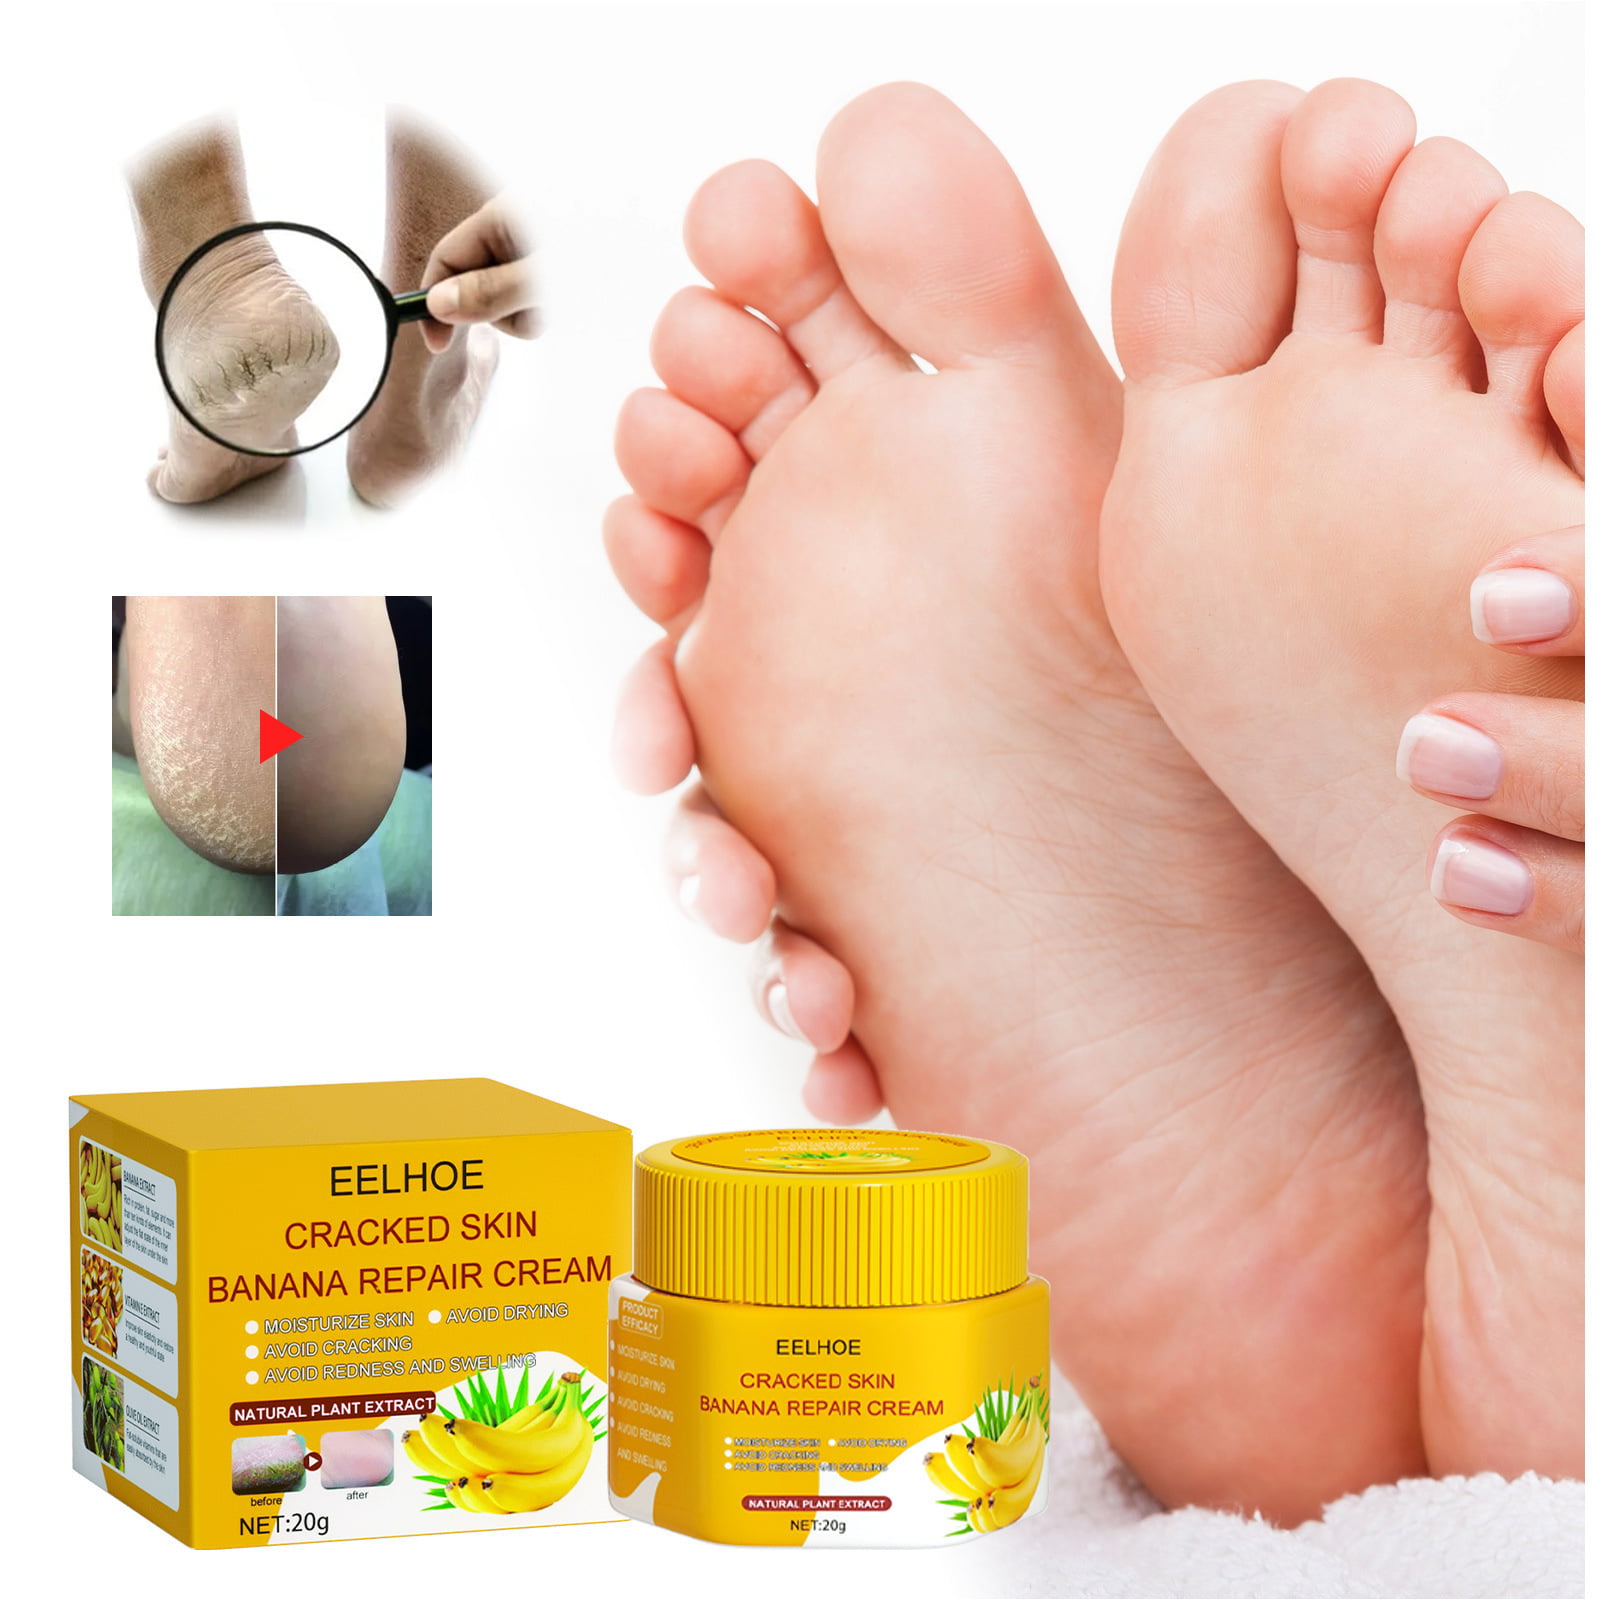 Horse Oil Foot Cleaning Ointment Moisturizing Foot Deodorant Callus Remover  Gel For Feet Pedicure Creams for Women G0W4 - AliExpress